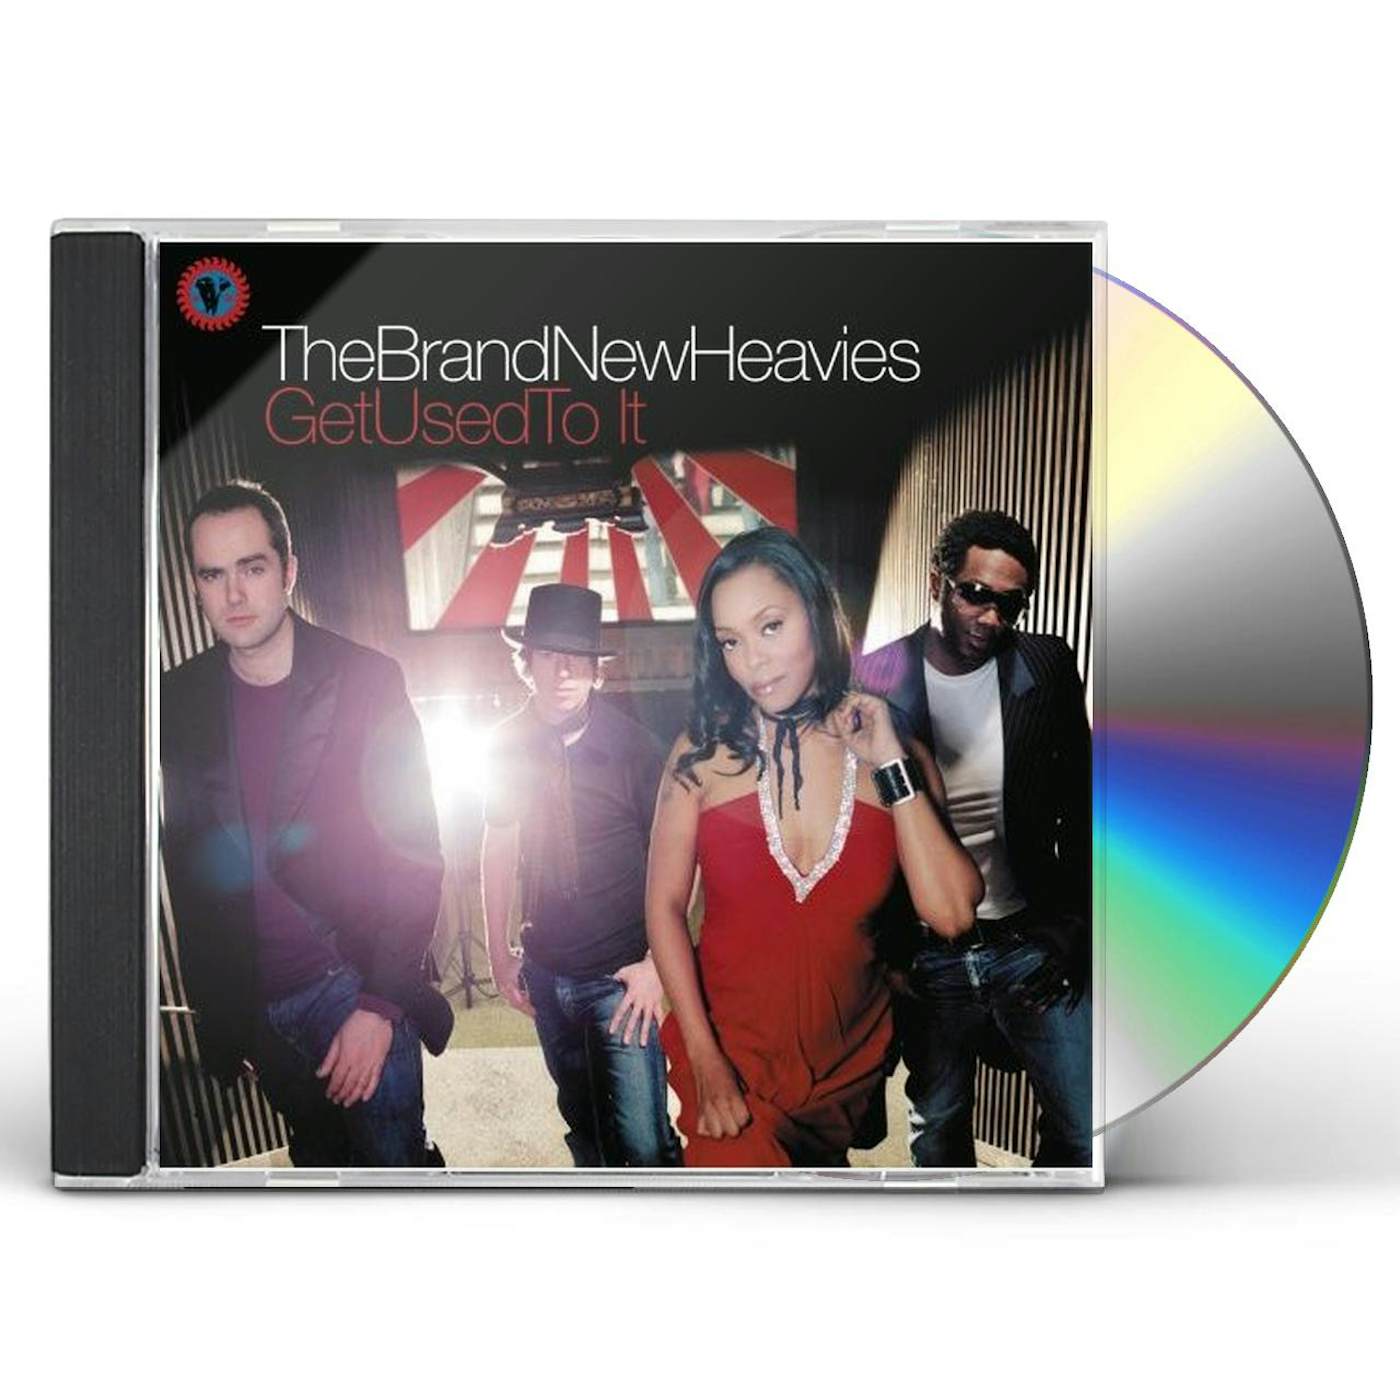 The Brand New Heavies GET USED TO IT CD